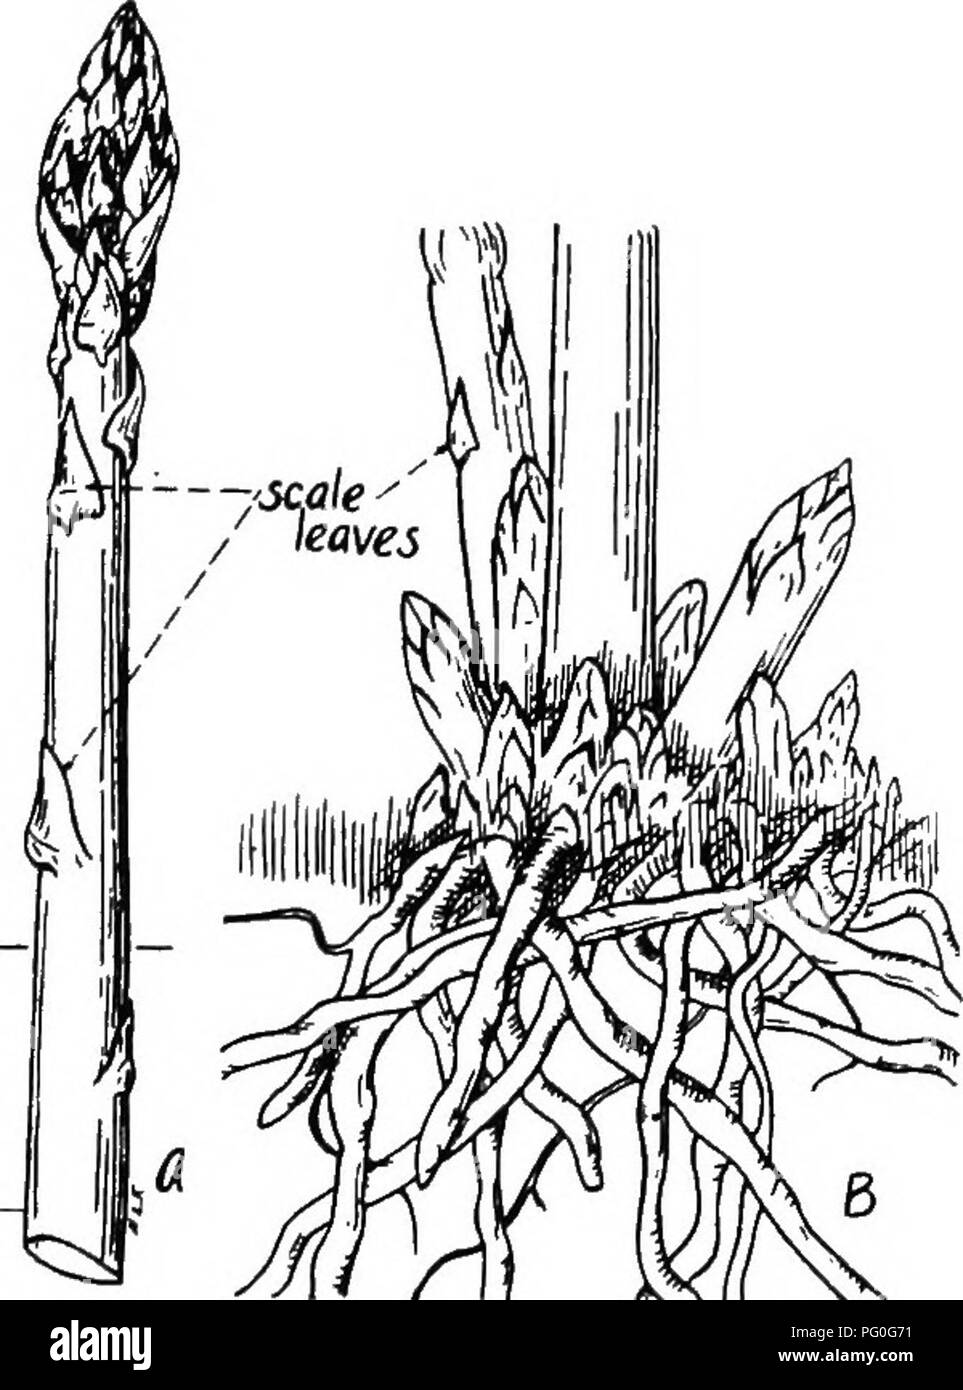 . The botany of crop plants : a text and reference book. Botany, Economic. LILIACEjE 247 edible portion of the plant. The scales borne on these fleshy shoots are true leaves. At lenthg, the stems become much branched. The filiform cladophylls (Fig. 98) are mostly clustered in the axils of the minute scales. They perform the function of leaves, as is evidenced by their green color. From the time of seeding, it is usually four years before the rootstock is vigorous enough to allow cuttings to be made.. Fig. 99.—Garden asparagus (Asparagus officinalis). A. young shoot &quot;spear&quot;; B, thick, Stock Photo